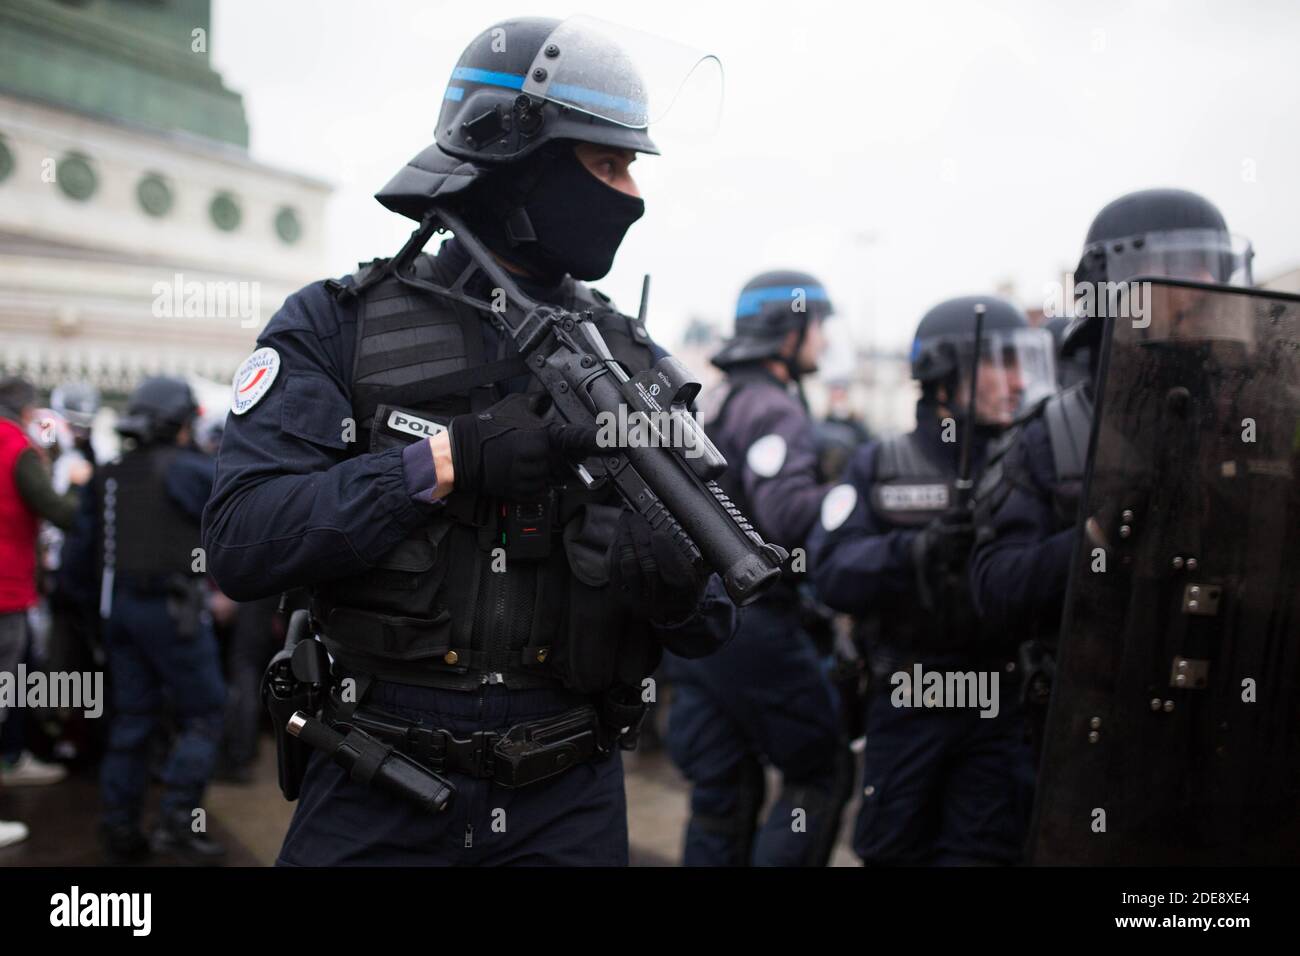 A riot police officers aims at protesters his rubber bullets gun flash ball  lbd 40 during clashes with on the sideline of an anti-government  demonstration called by the Yellow Vests "Gilets Jaunes"